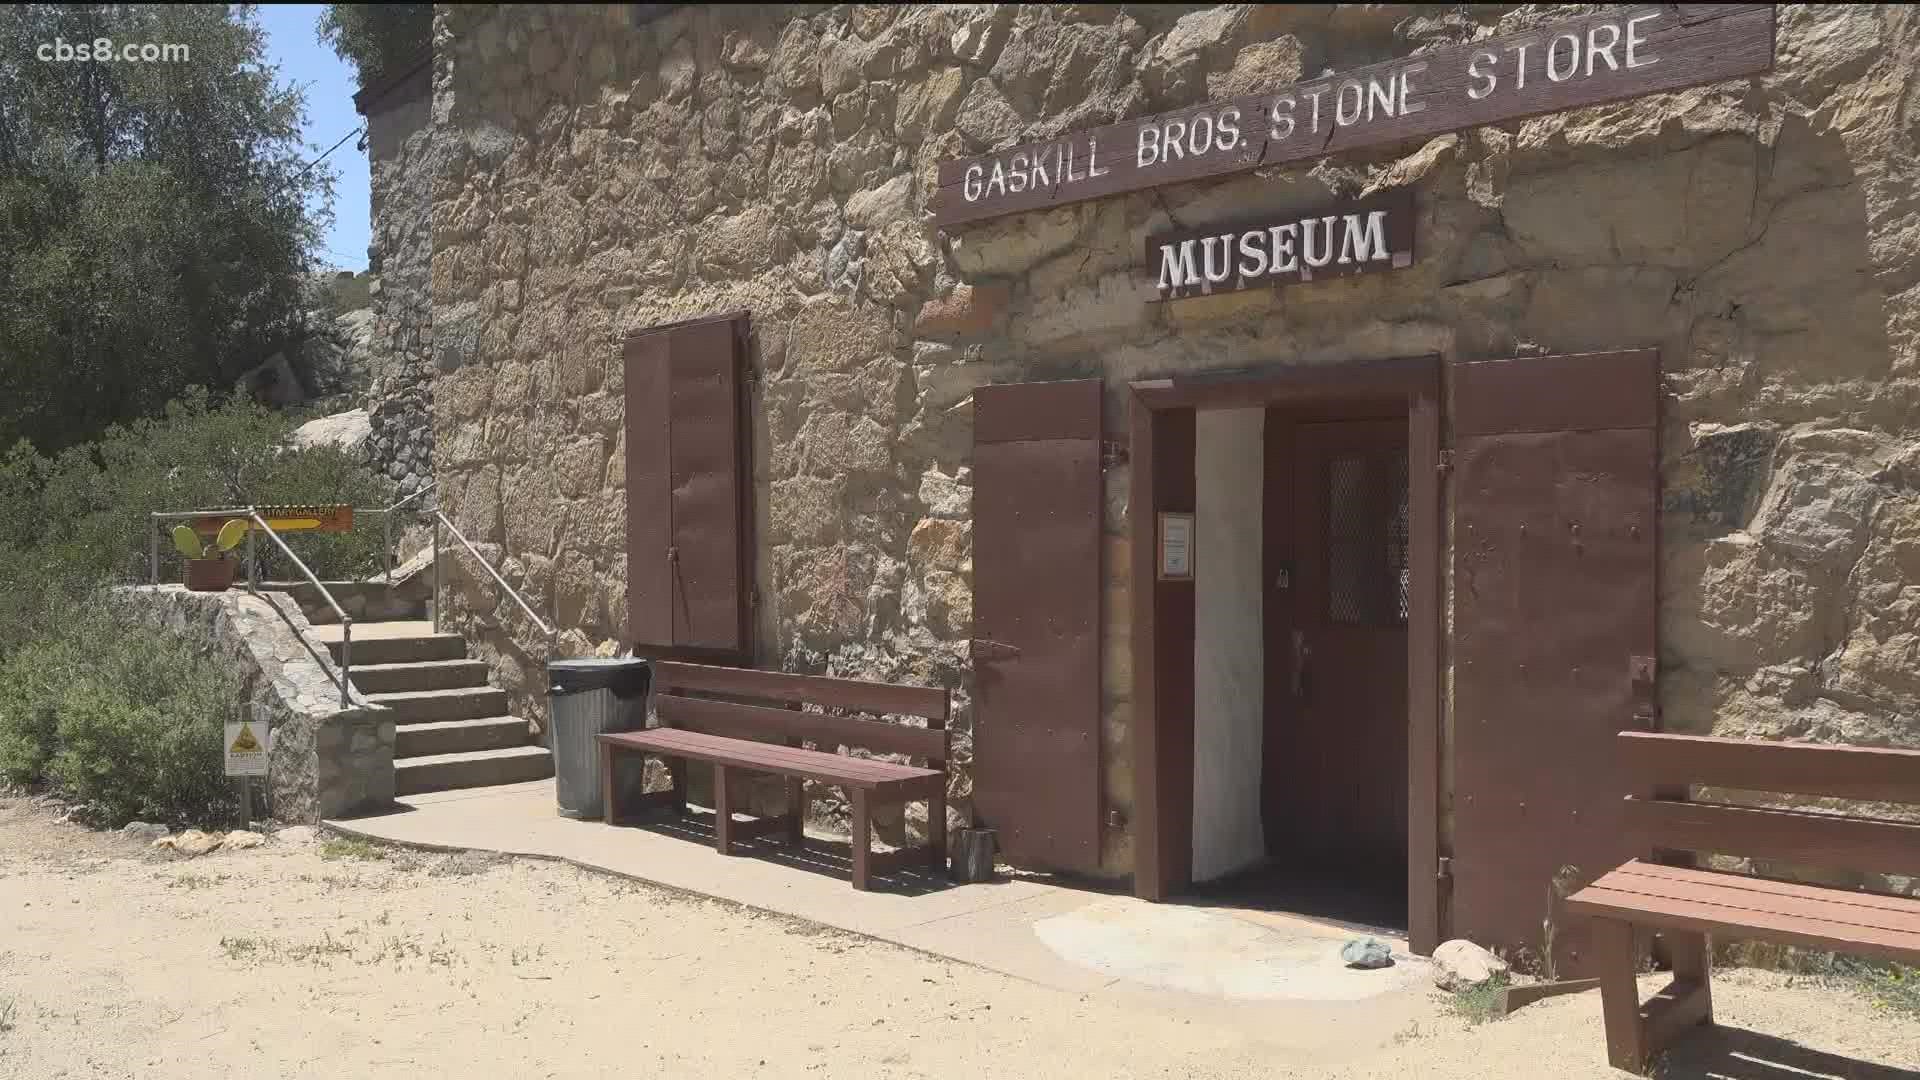 Campo Days Museums opening their doors for free to public